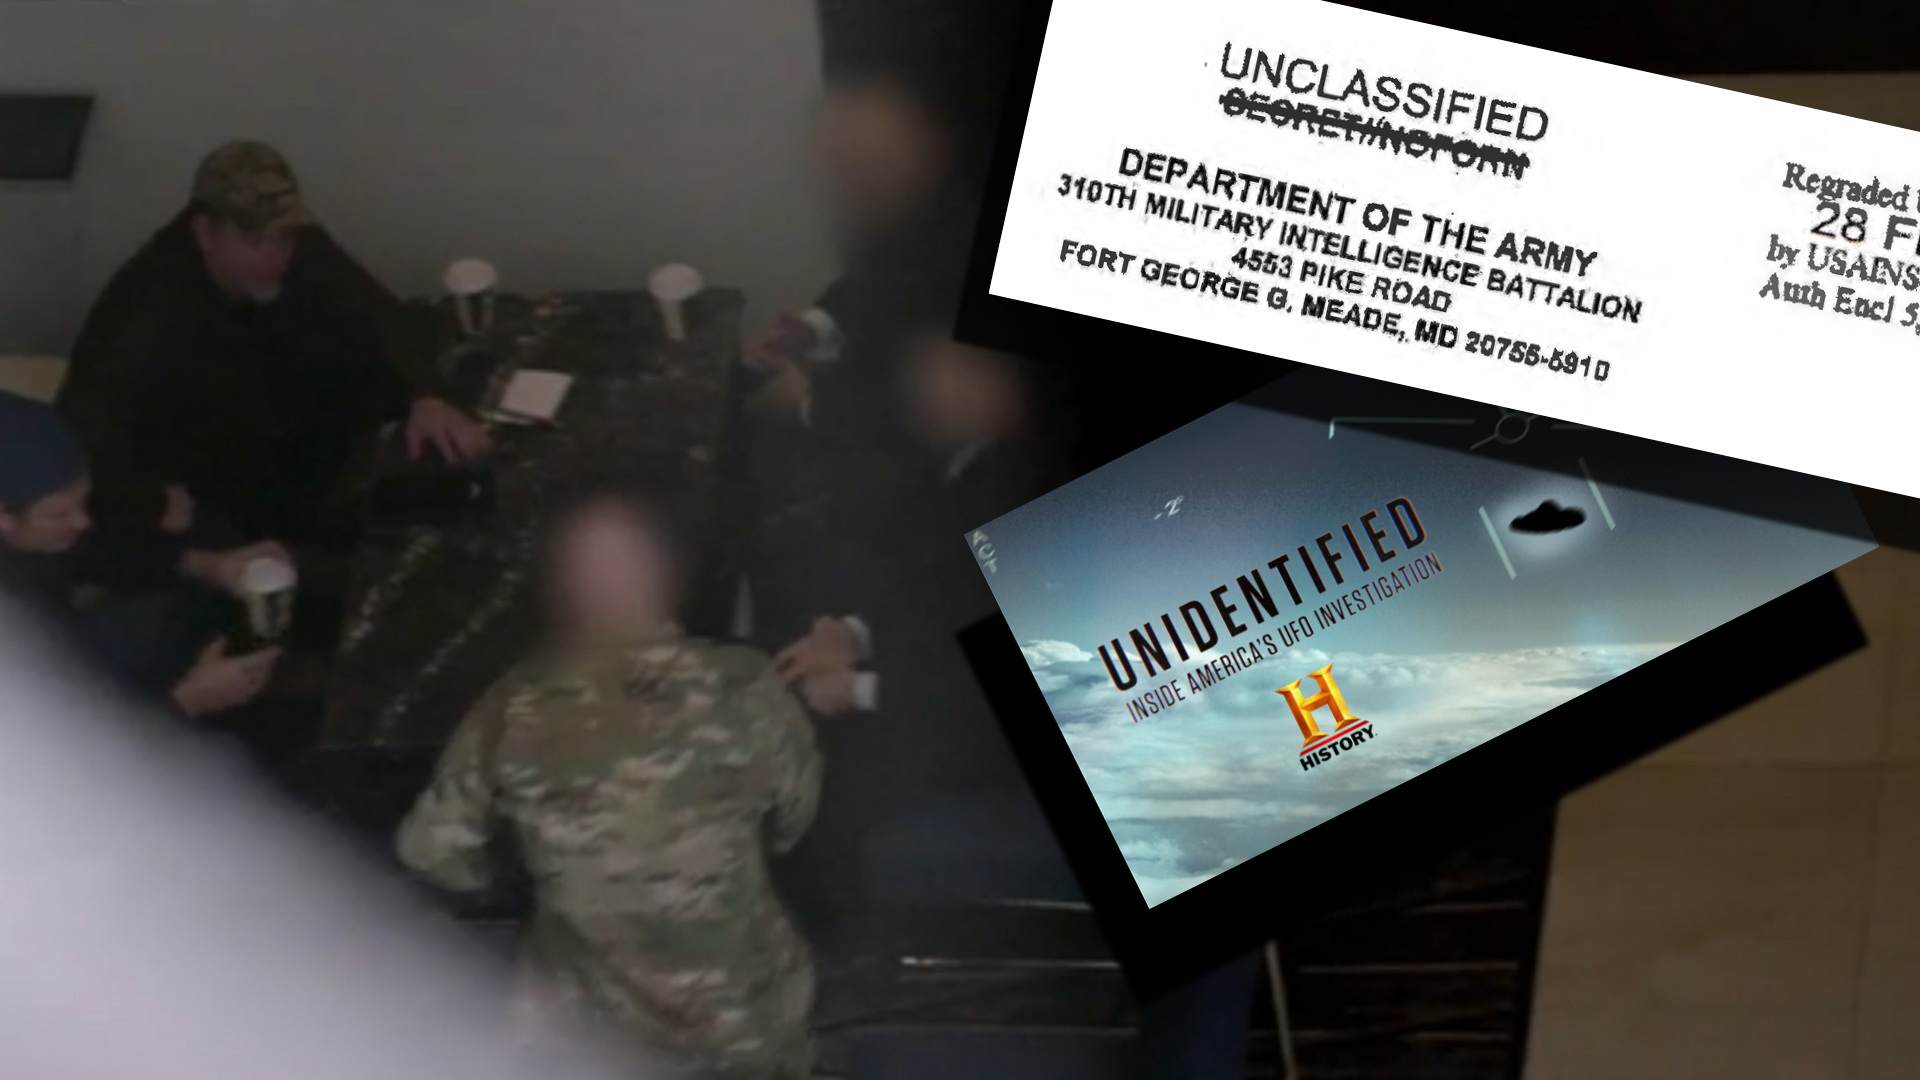 How Secretly Filming a Counterintelligence Agent And Misrepresenting Classified Information Sparked An Official US Army Investigation